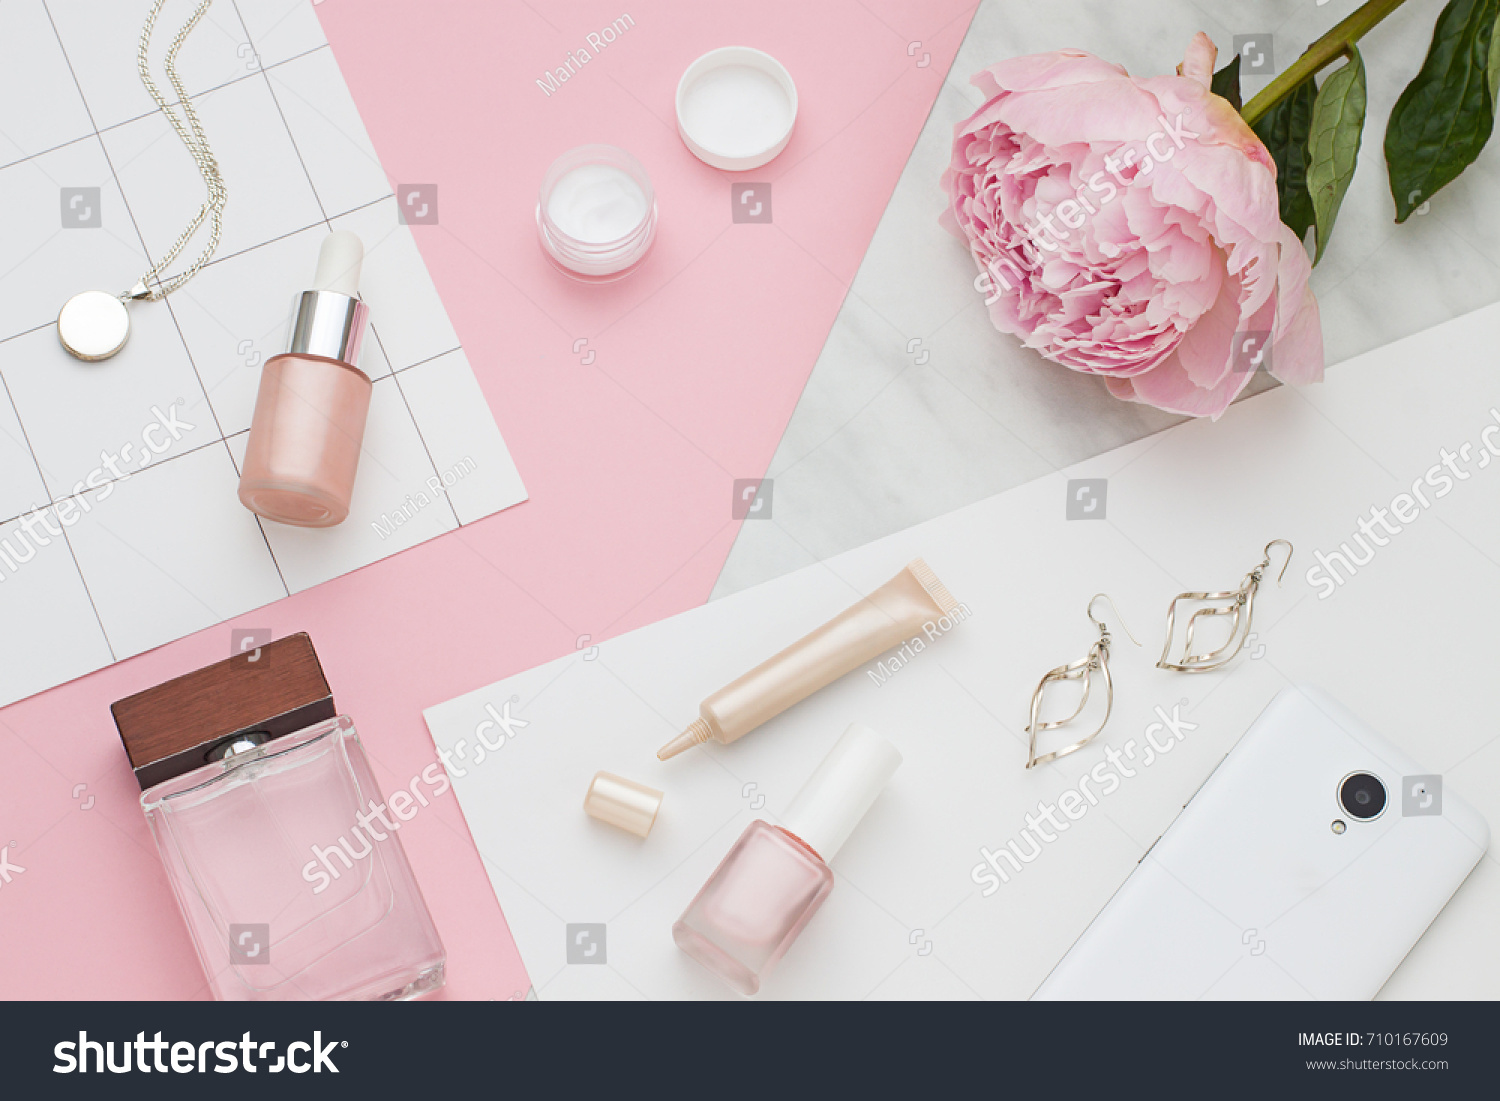 Beauty flat lay with cosmetic bottles, phone and flower. Top view
 #710167609